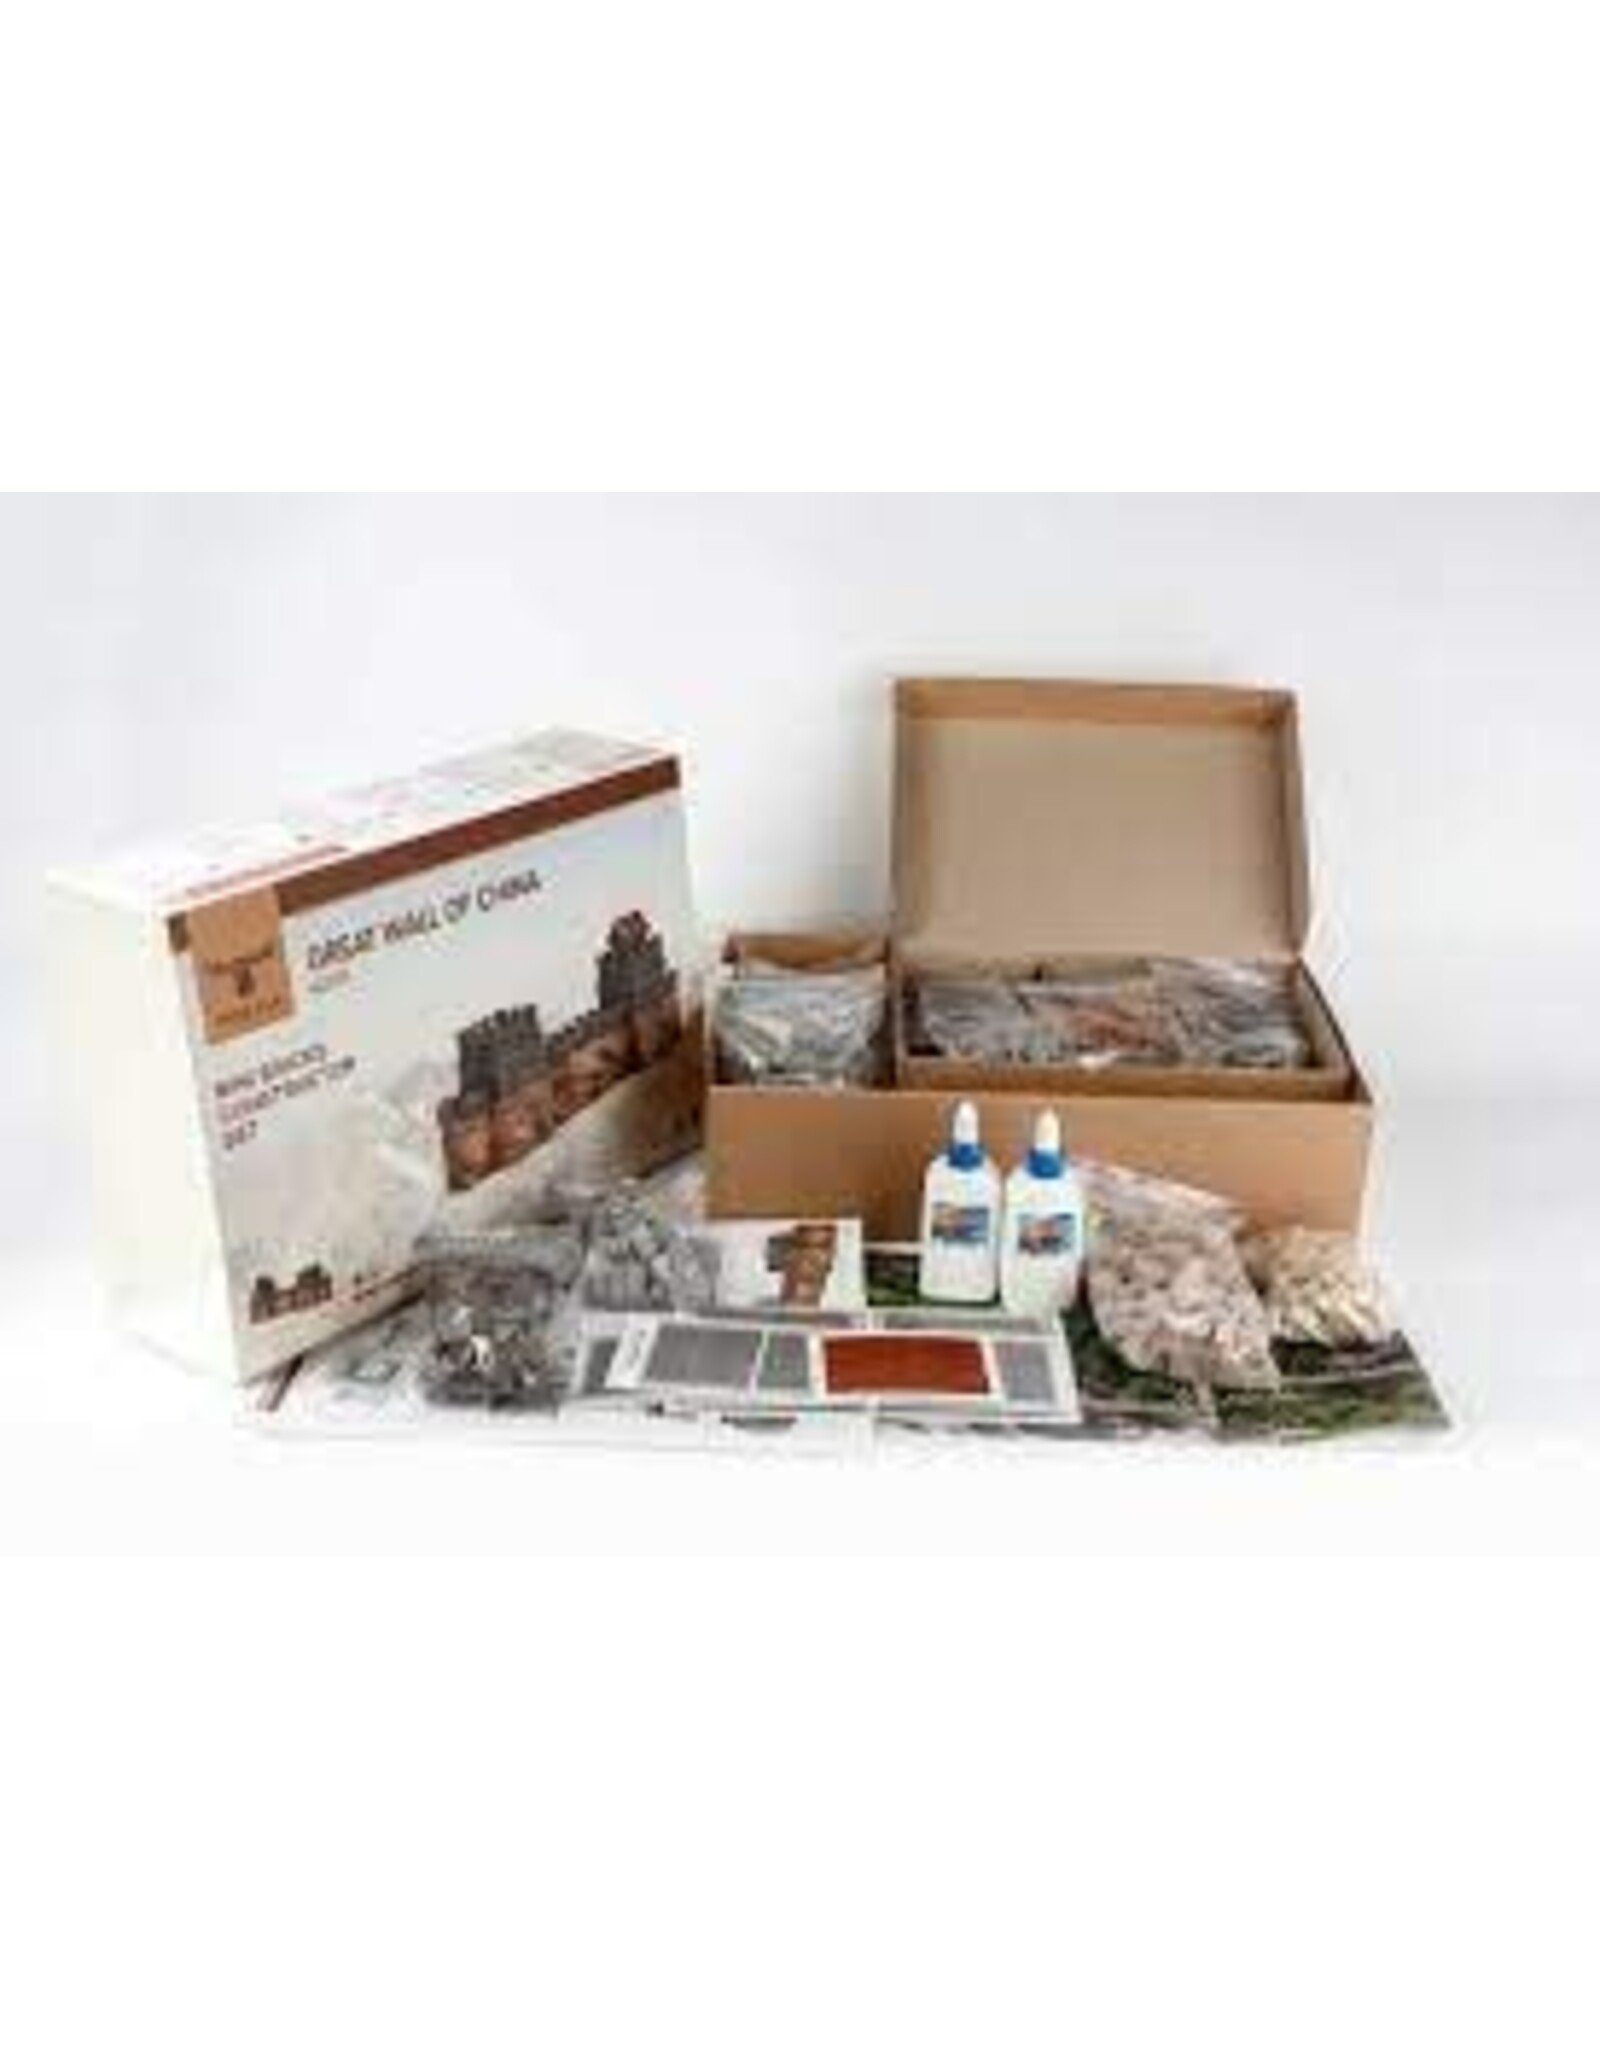 CLEARANCE Wise Elk Great Wall of China Mini Bricks Construction Set